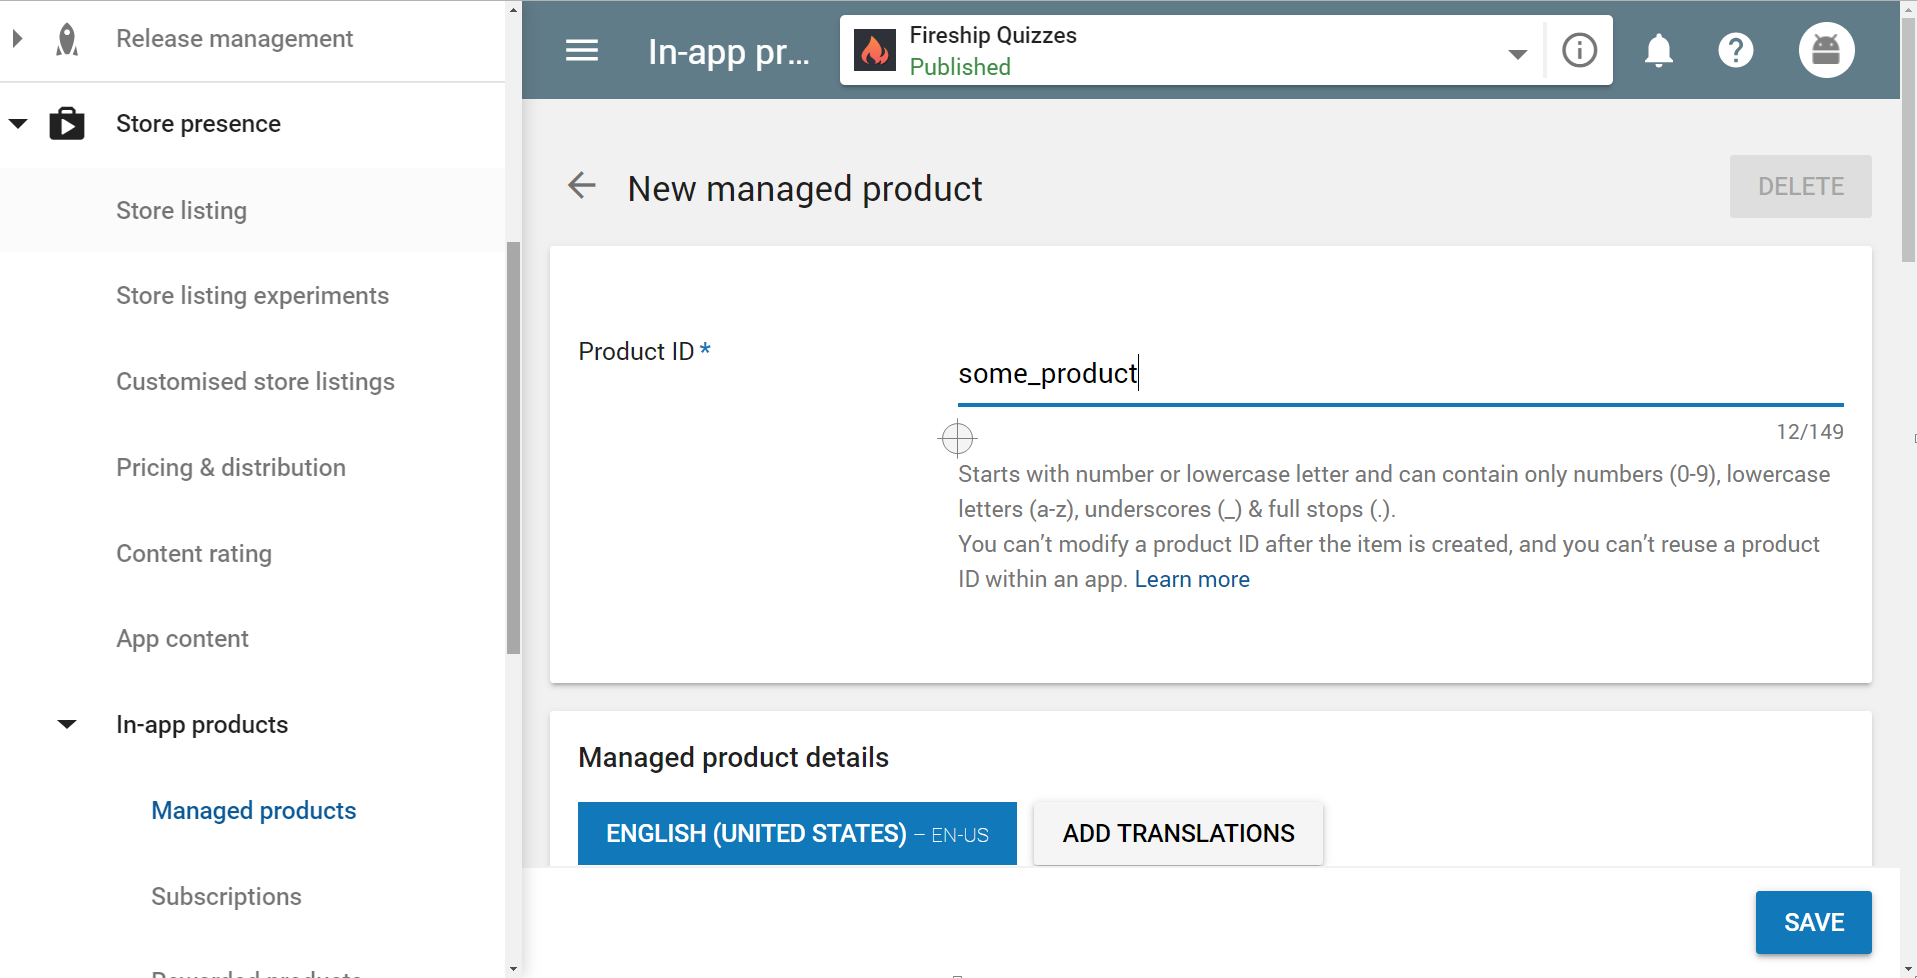 Setup a merchant account and create a managed product